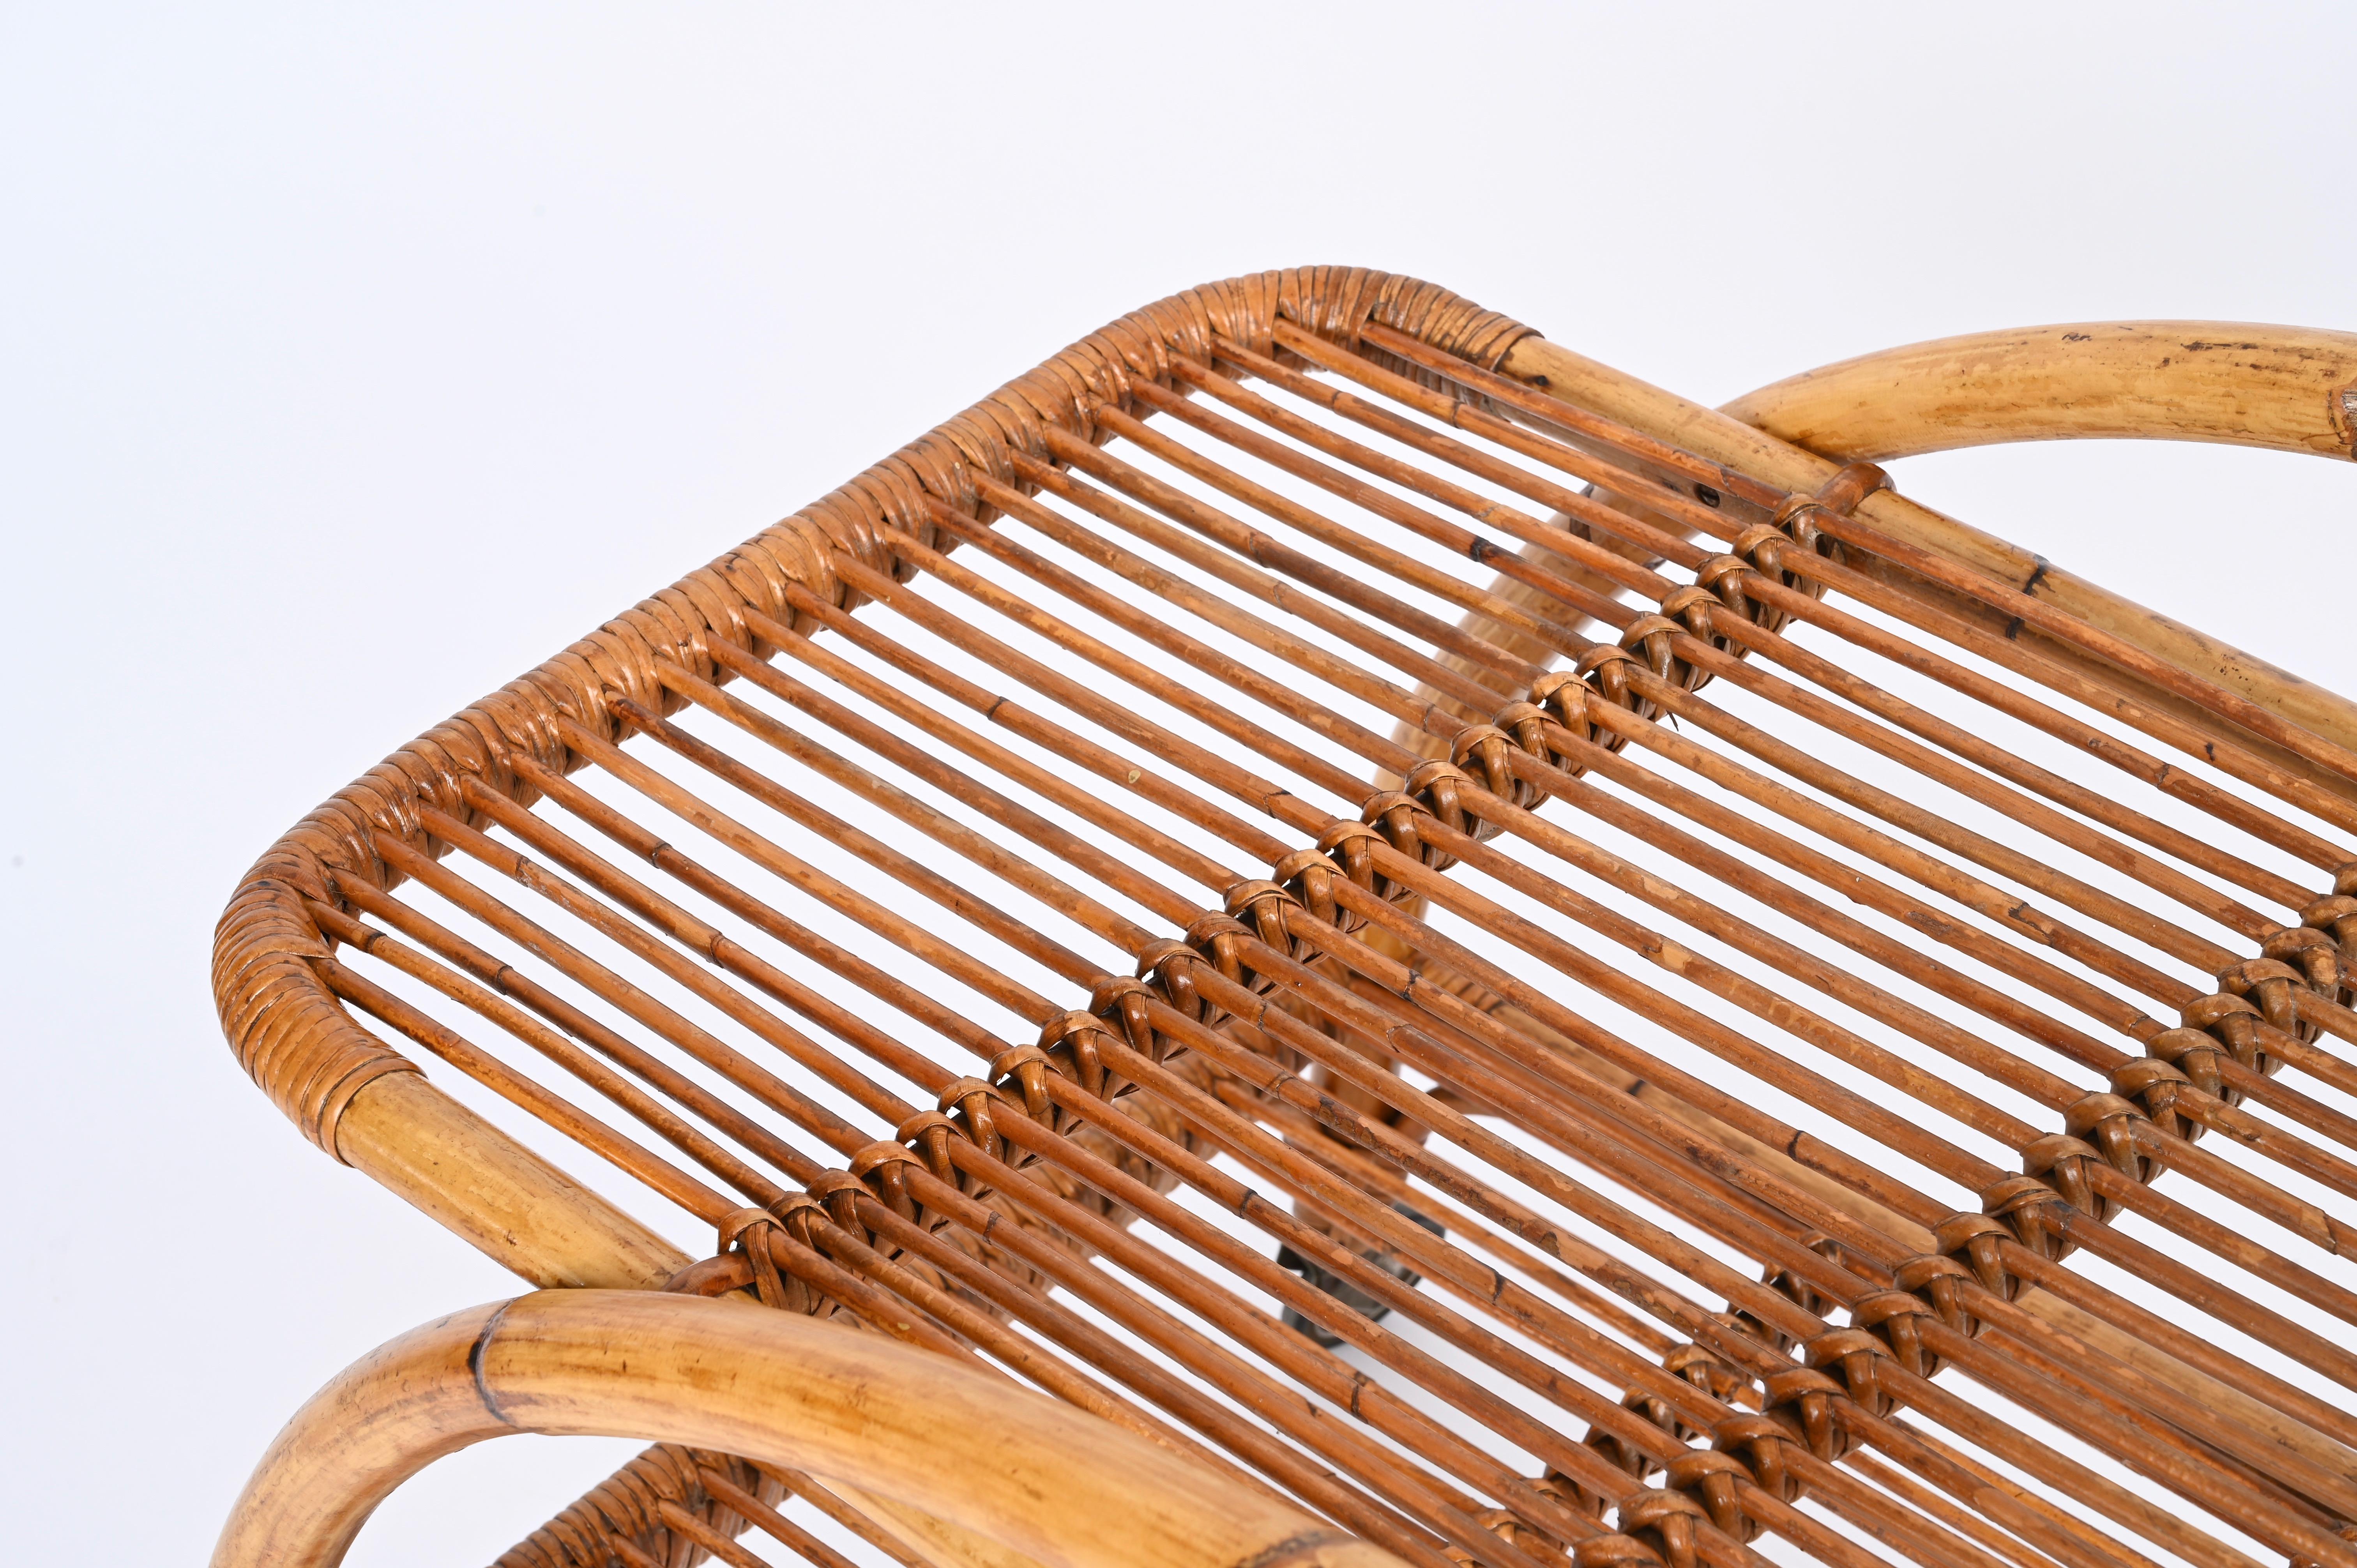 Italian Midcentury French Riviera Rattan and Wicker Serving Bar Cart Trolley, Italy 1960 For Sale